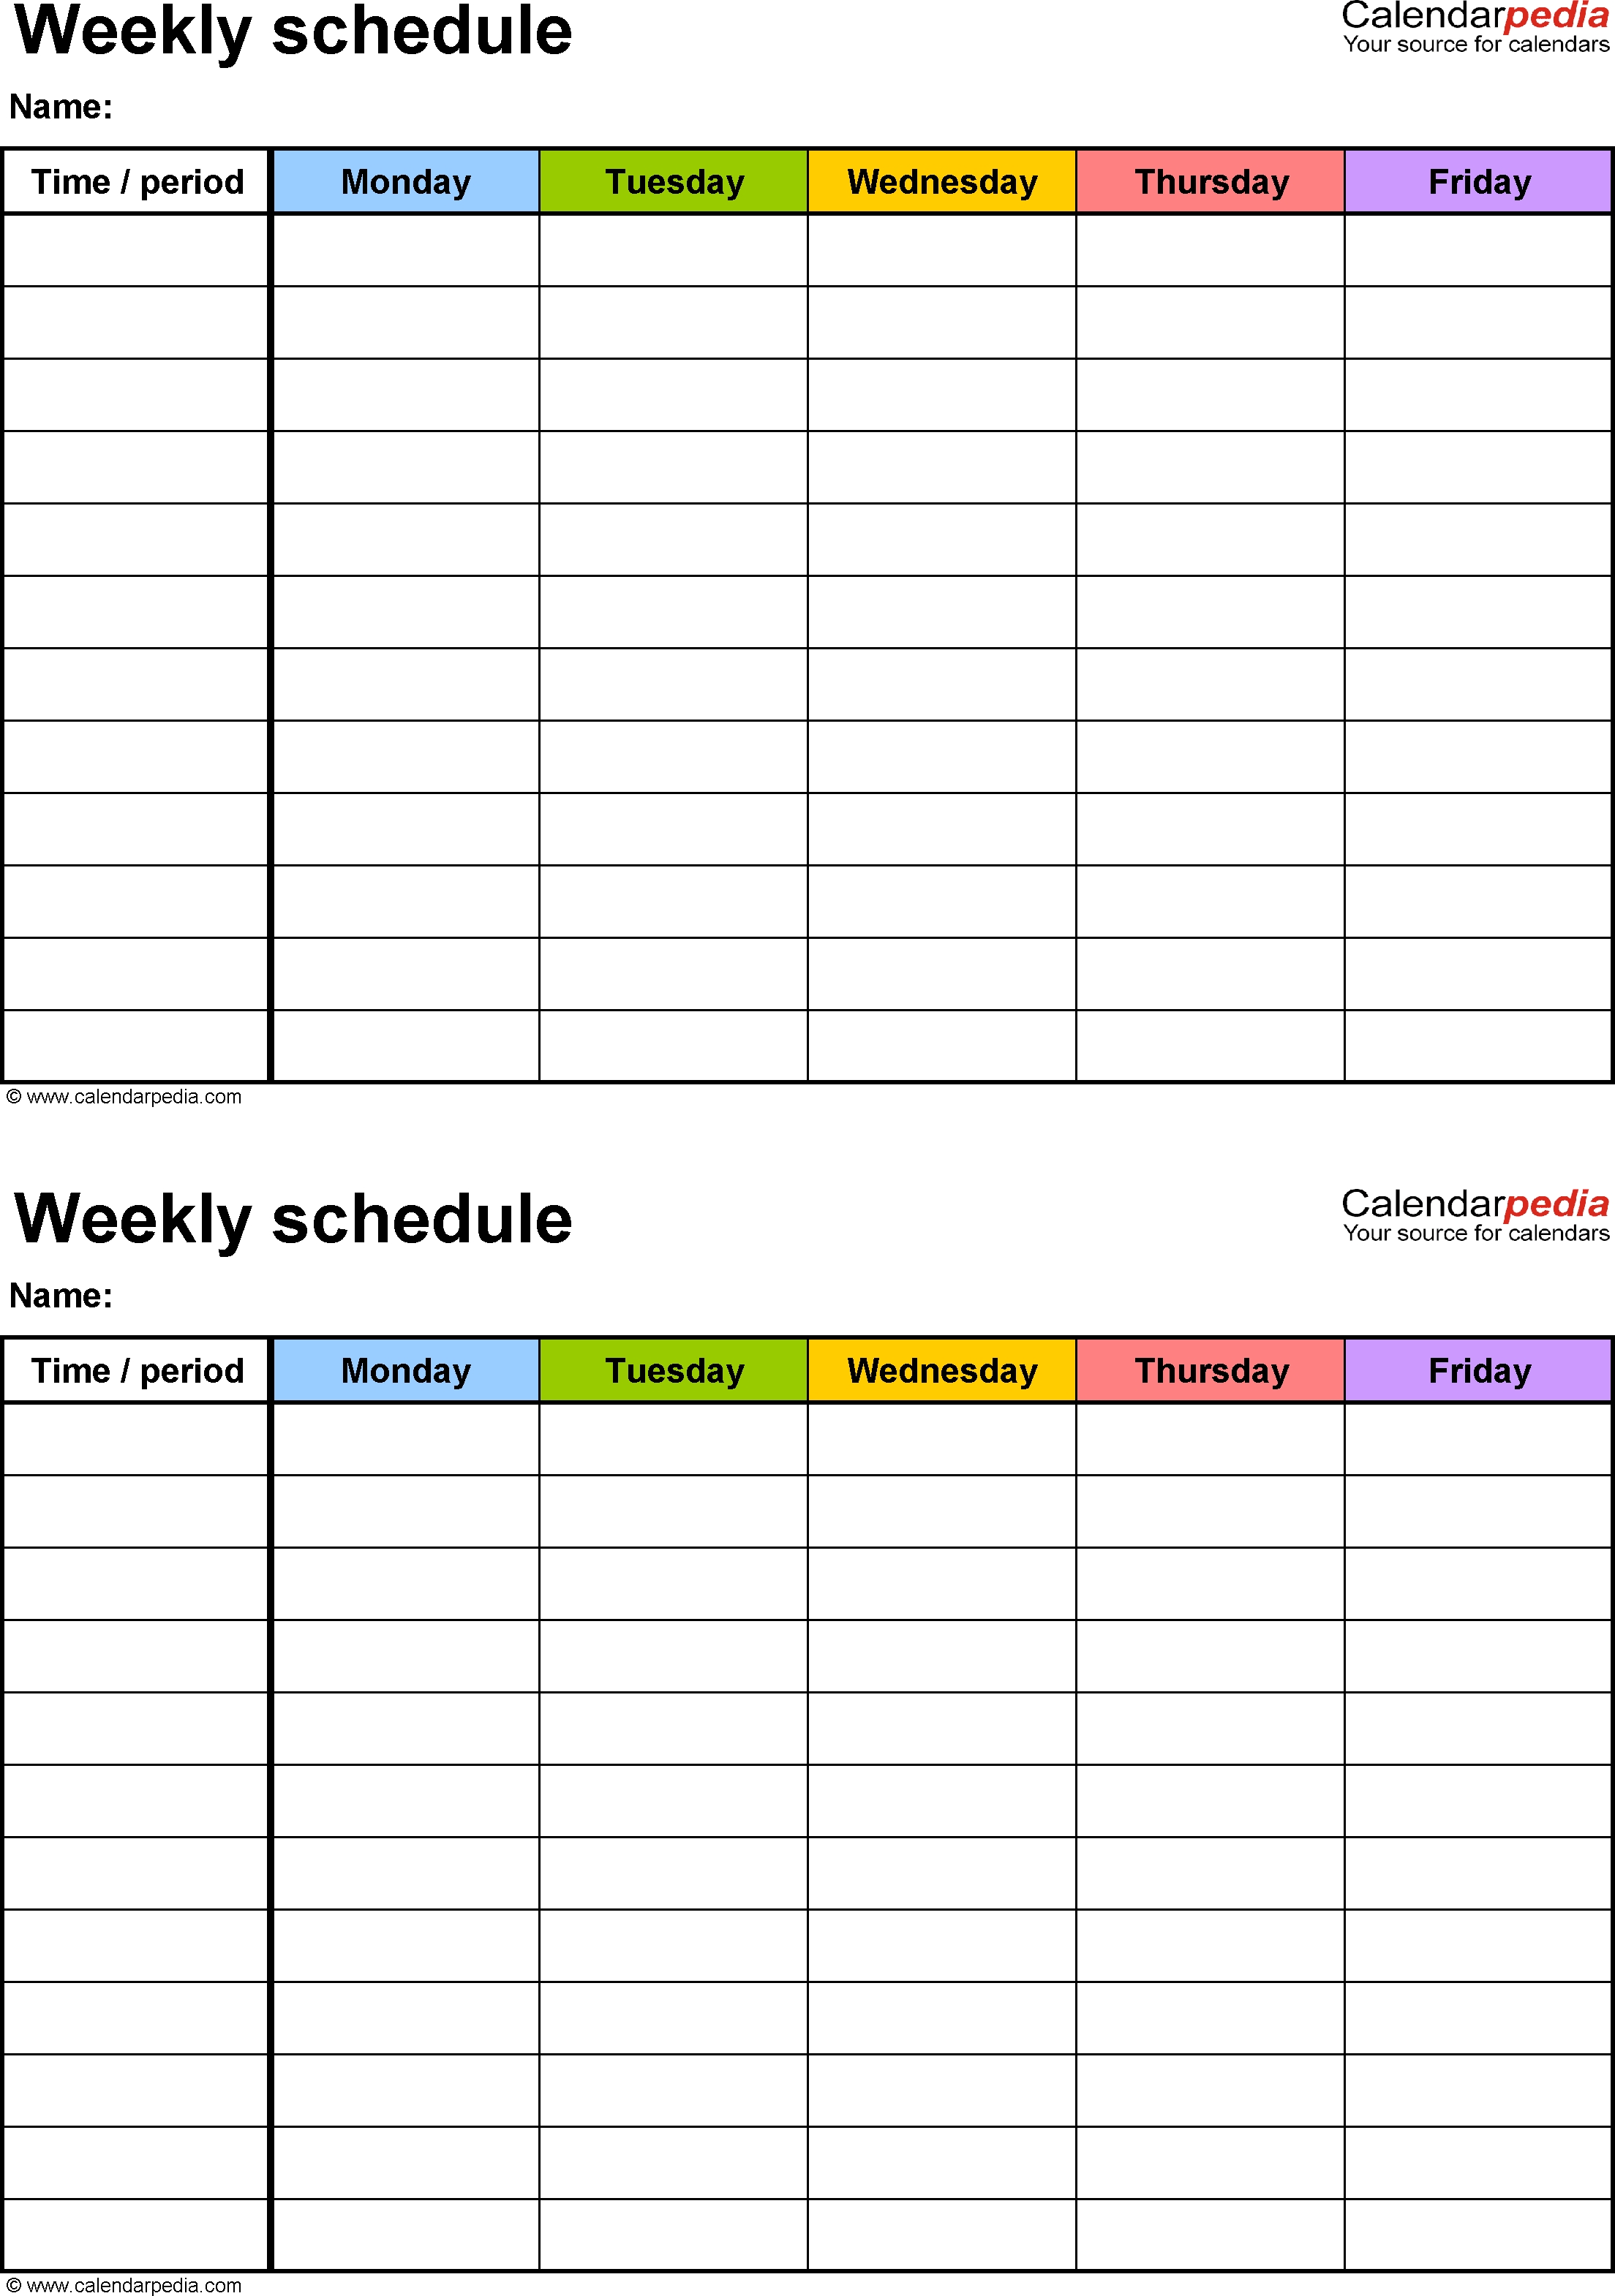 Free Weekly Schedule Templates For Word - 18 Templates  Printable Weekly Schedule Monday Through Friday